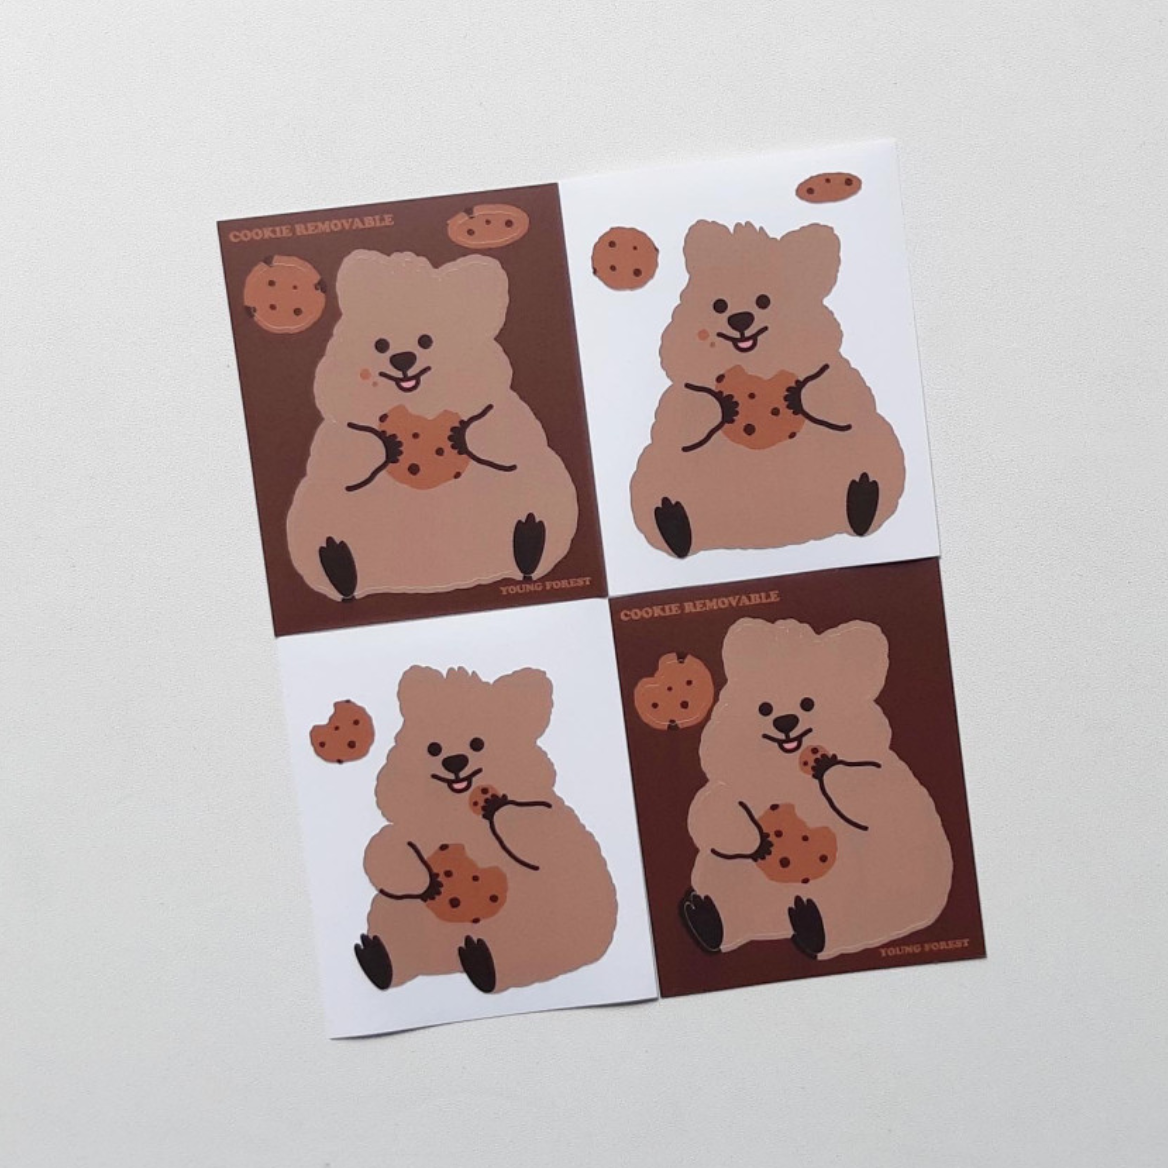 [YOUNG FOREST] Cookie Quokka Removable Sticker